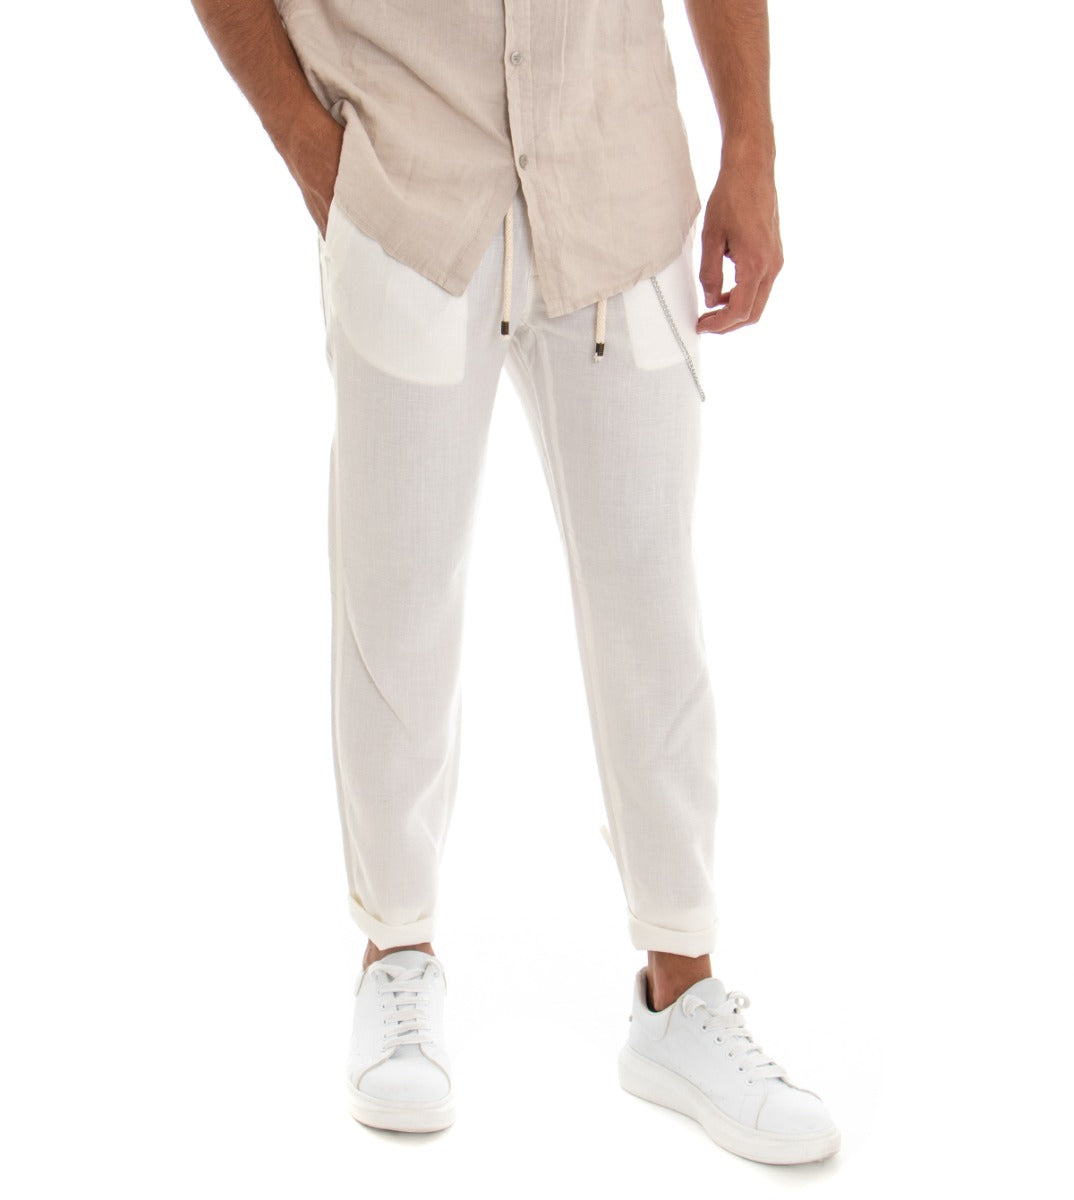 Equipe Men's Trousers Solid Color White Linen Drawstring GIOSAL